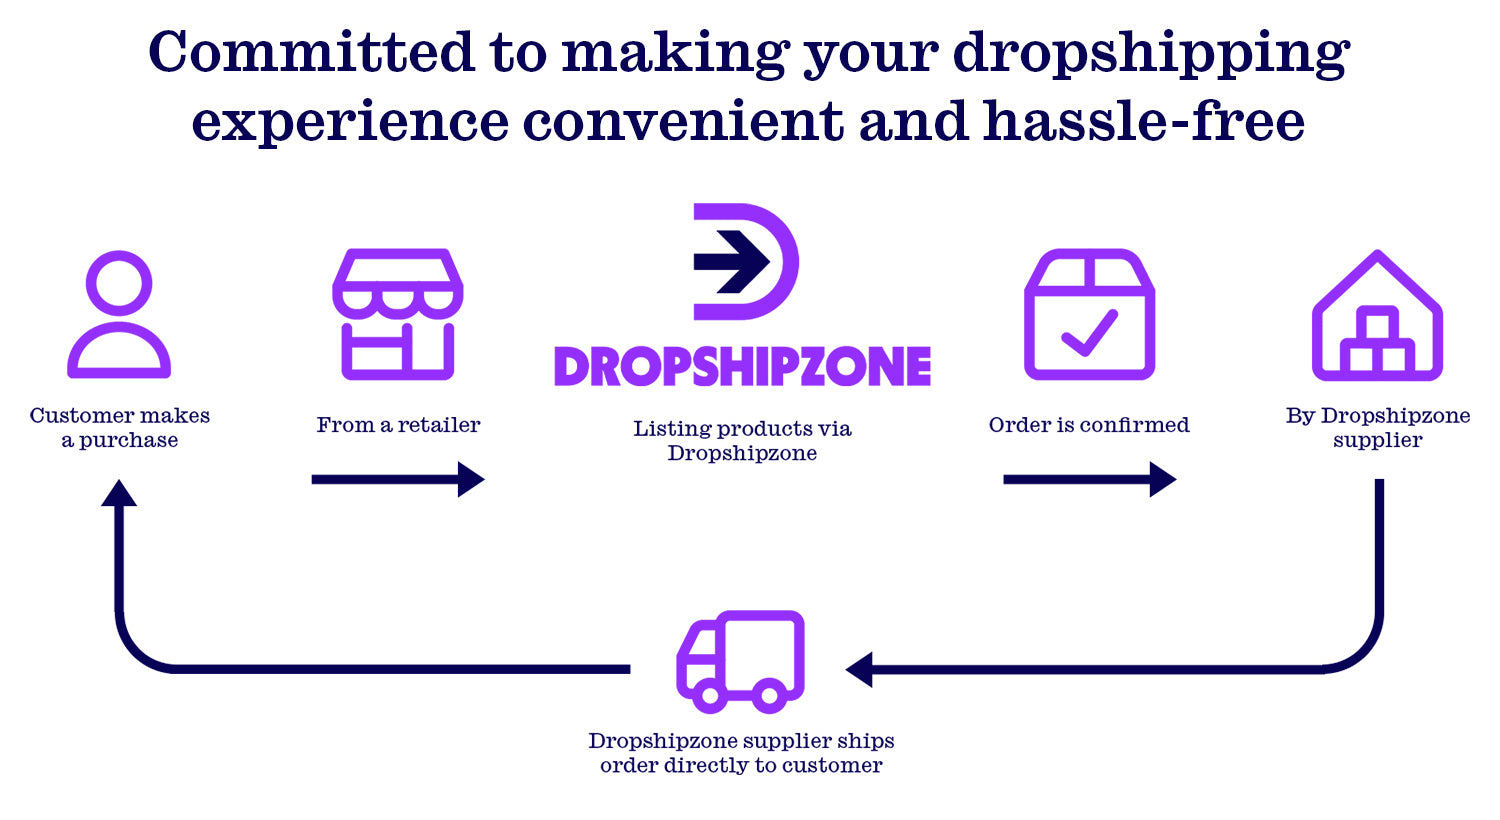 Join Dropshipzone today and add trending products to your online store. We make it seamless and hassle-free.